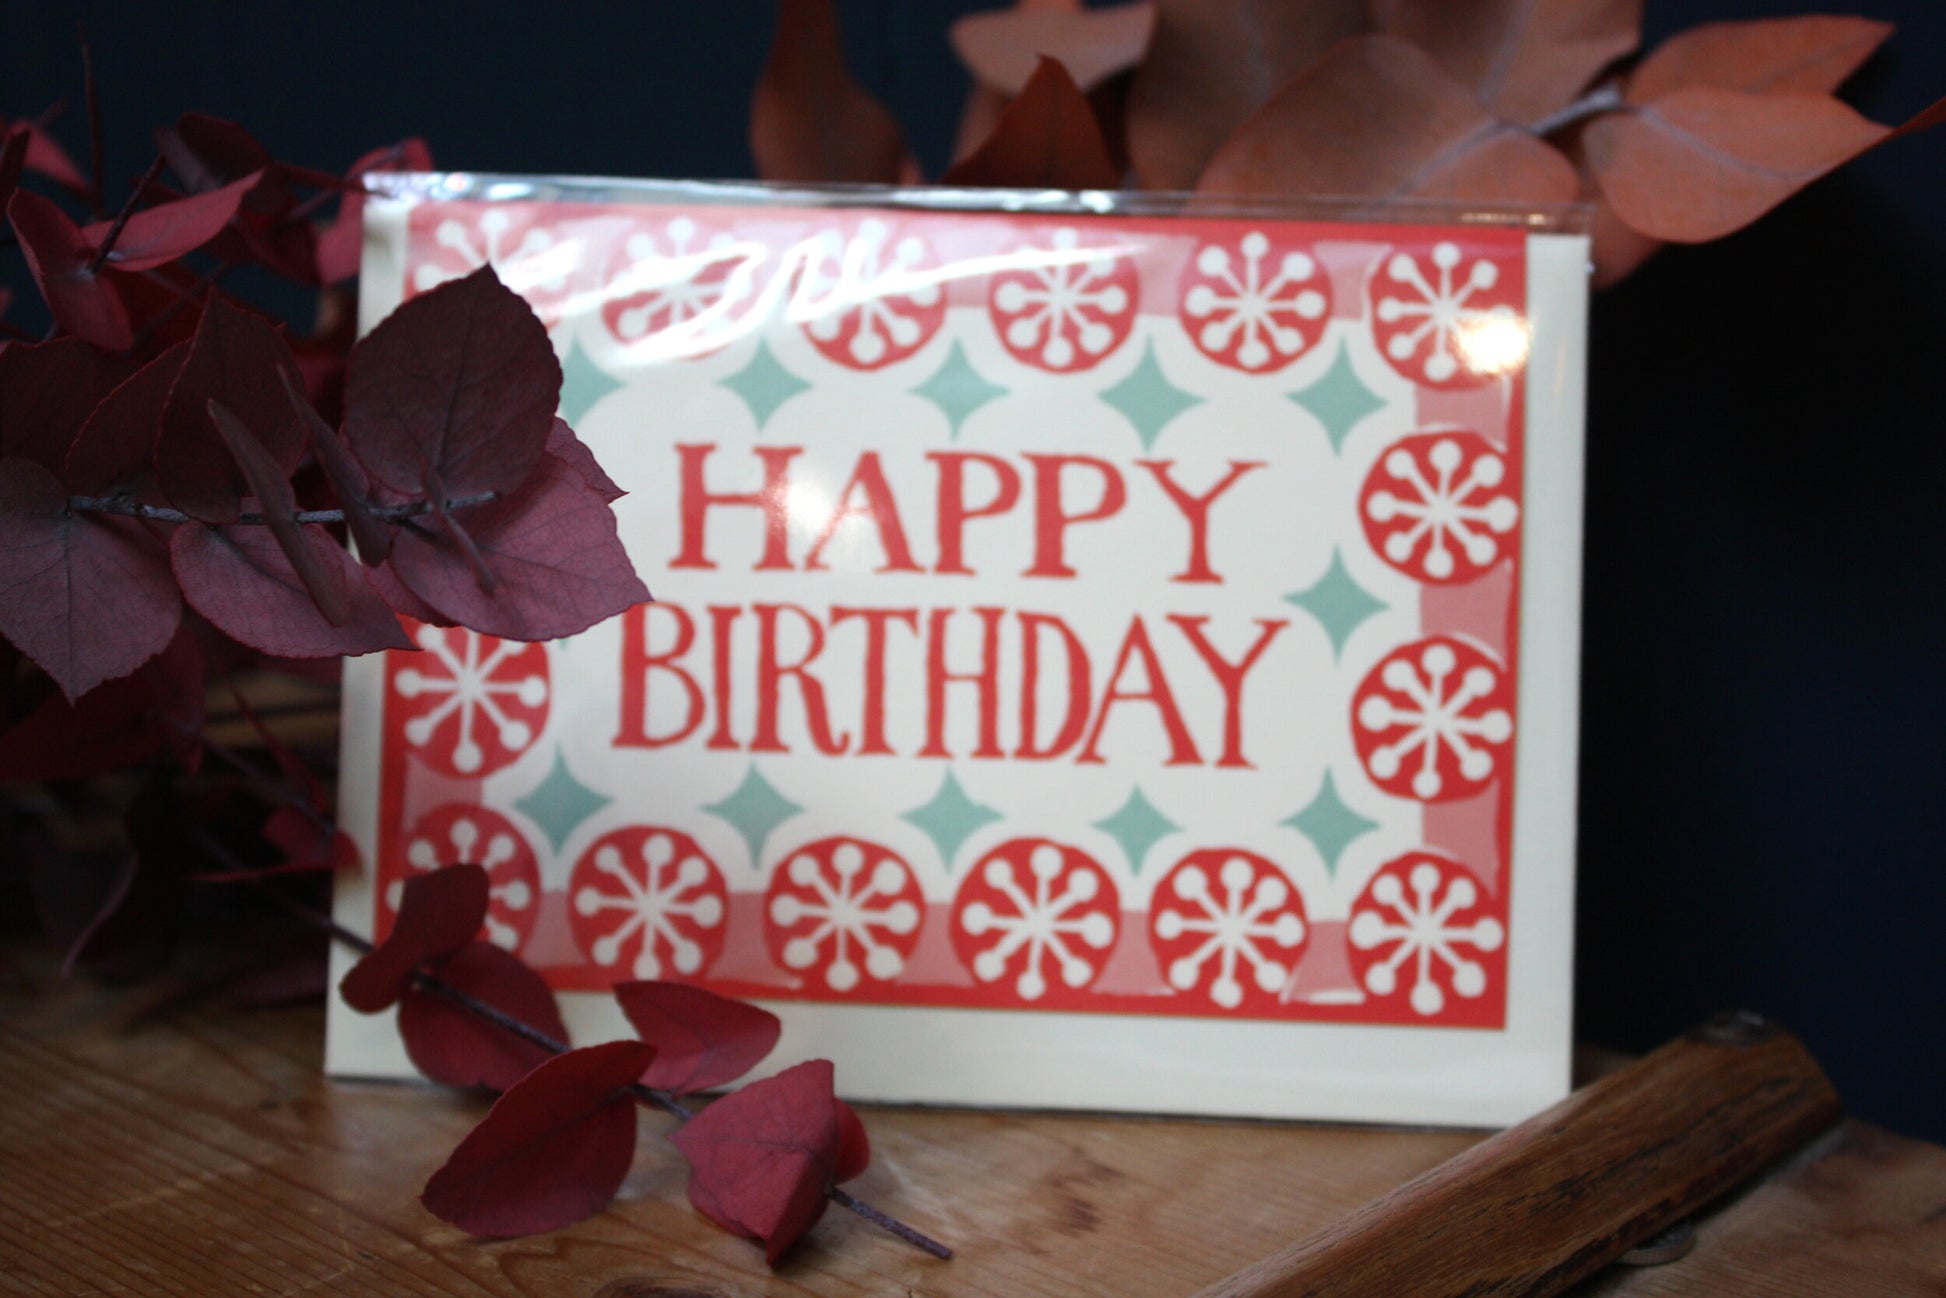 Happy Birthday card - coral & pink - The Bristol Artisan Handmade Sustainable Gifts and Homewares.